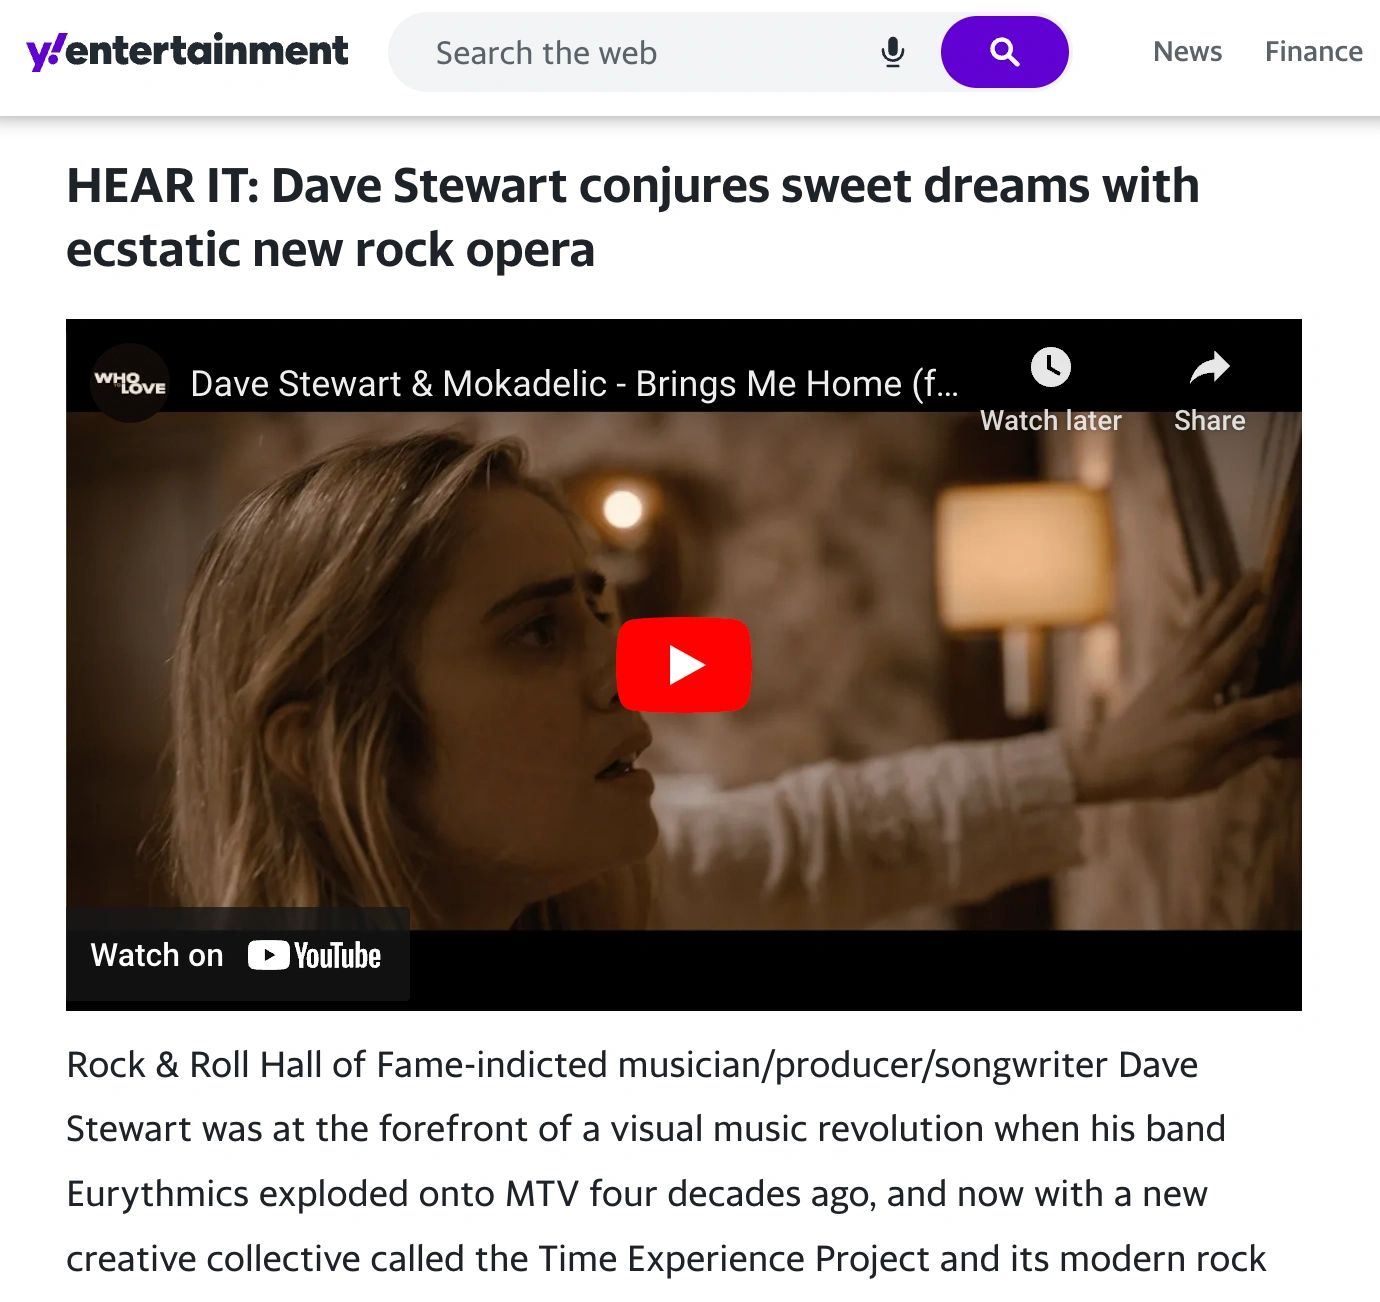 YAHOO! ENTERTAINMENT
HEAR IT: Dave Stewart conjures sweet dreams with ecstatic new rock opera